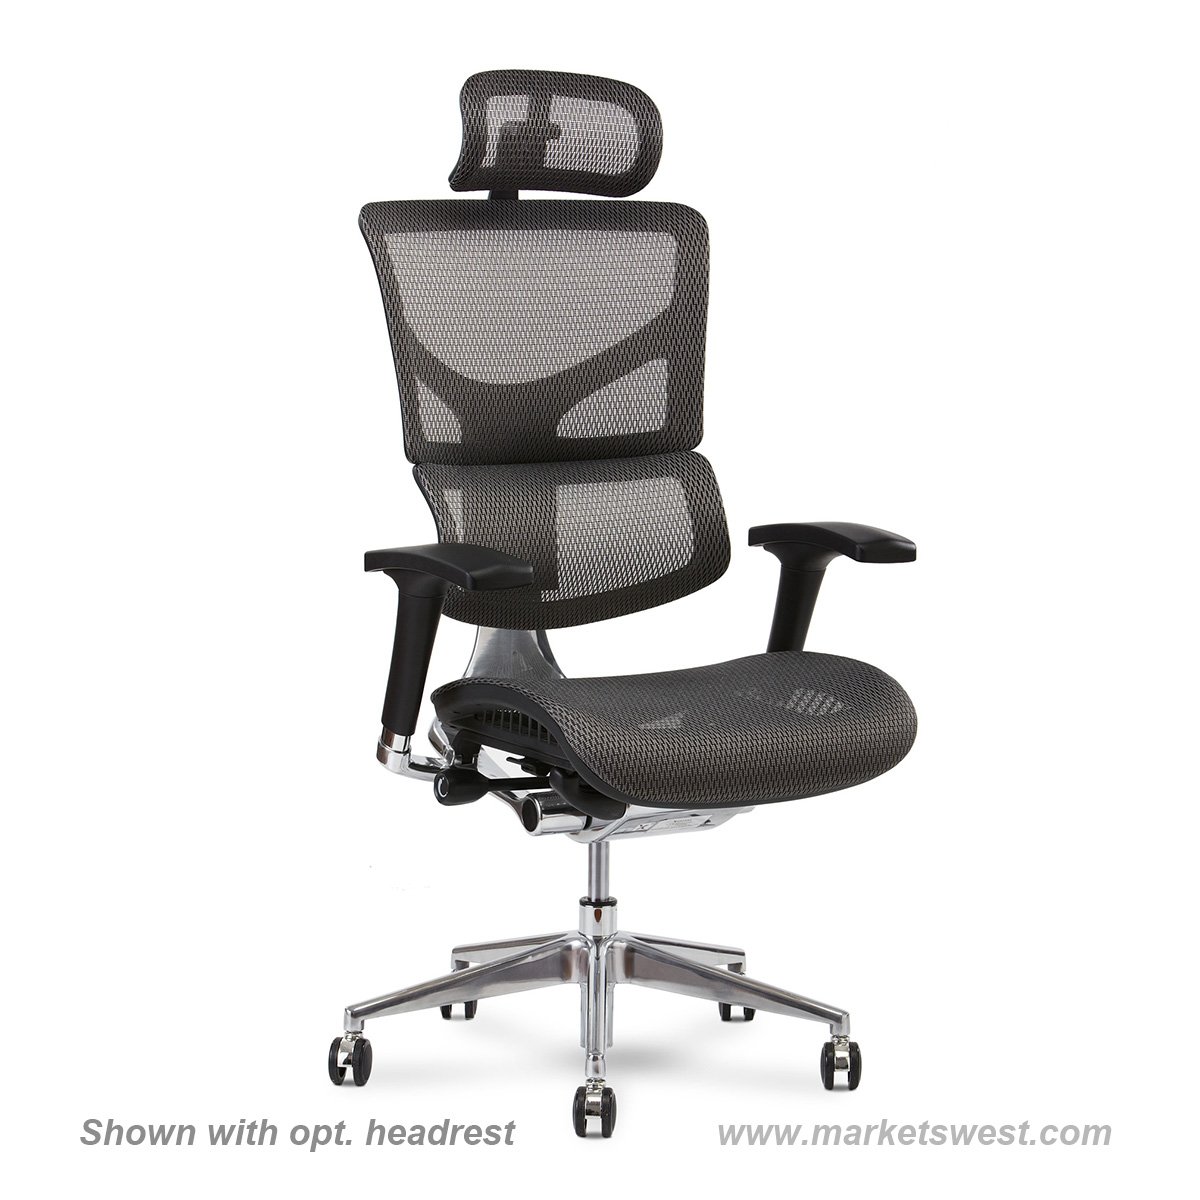 X-Chair X1 High End Task Chair, Grey Flex Mesh with Headrest - Ergonomic  Office Seat/Dynamic Variable Lumbar Support/Highly Adjustable/Relaxed